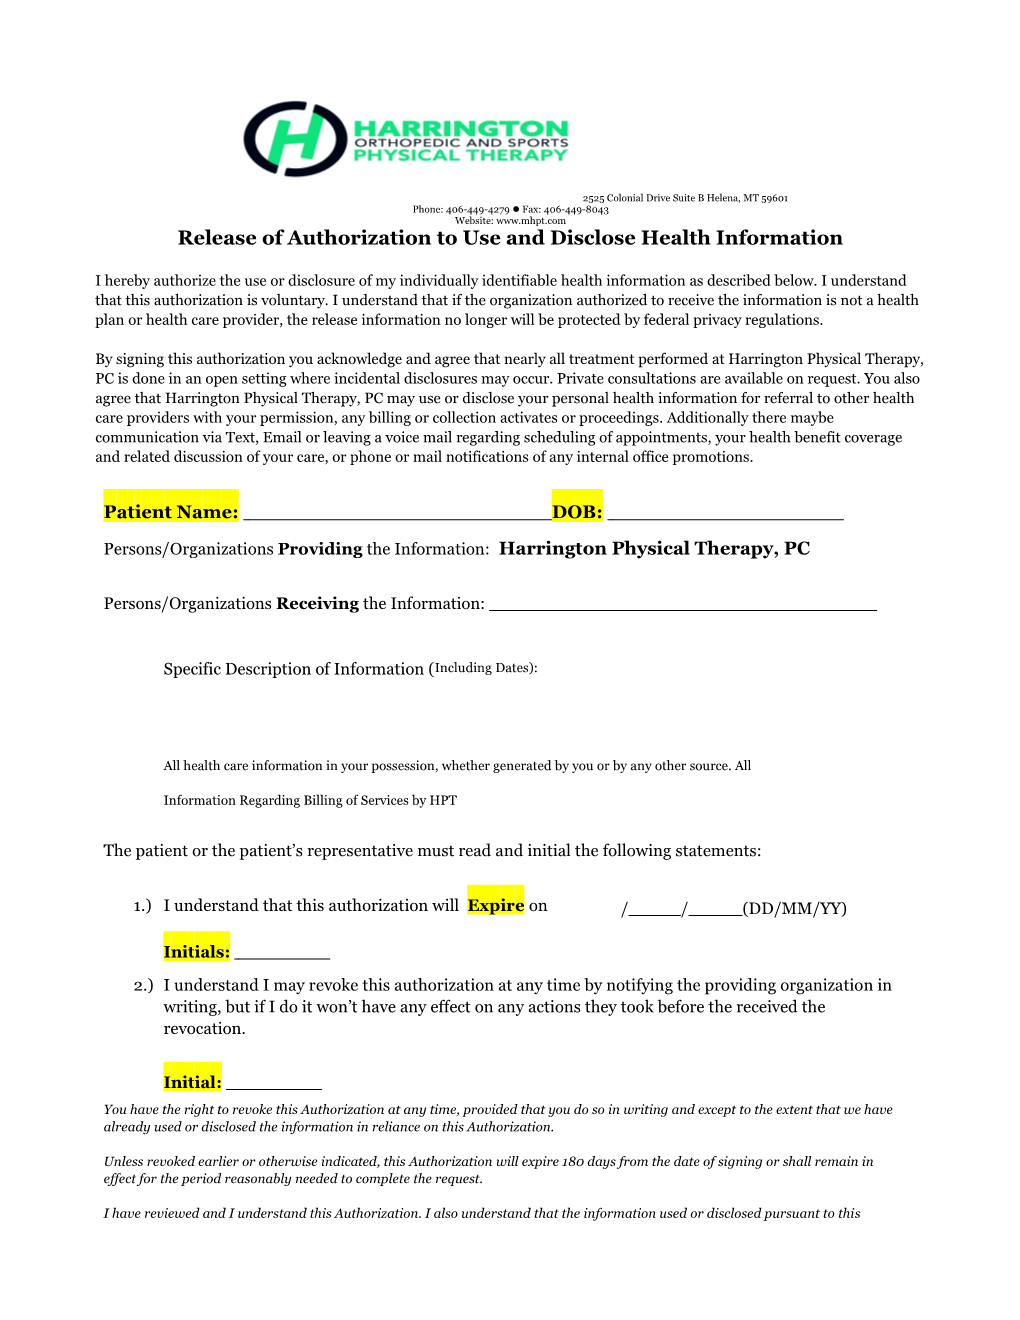 Release of Authorization to Use and Disclose Health Information